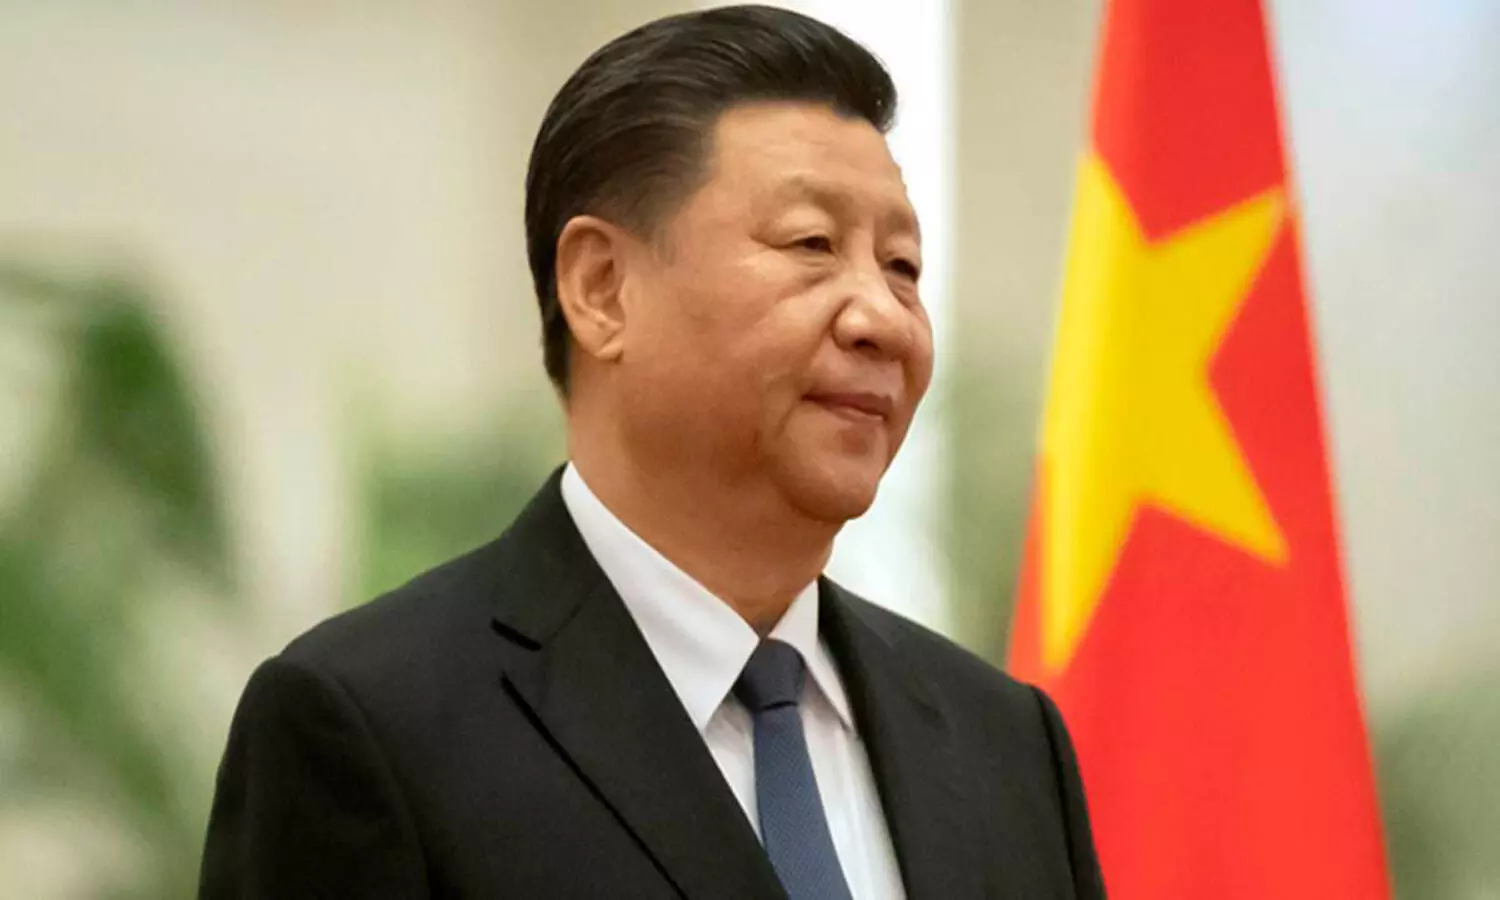 Power must be held by patriots, not traitors, says Xi Jinping in Hong Kong